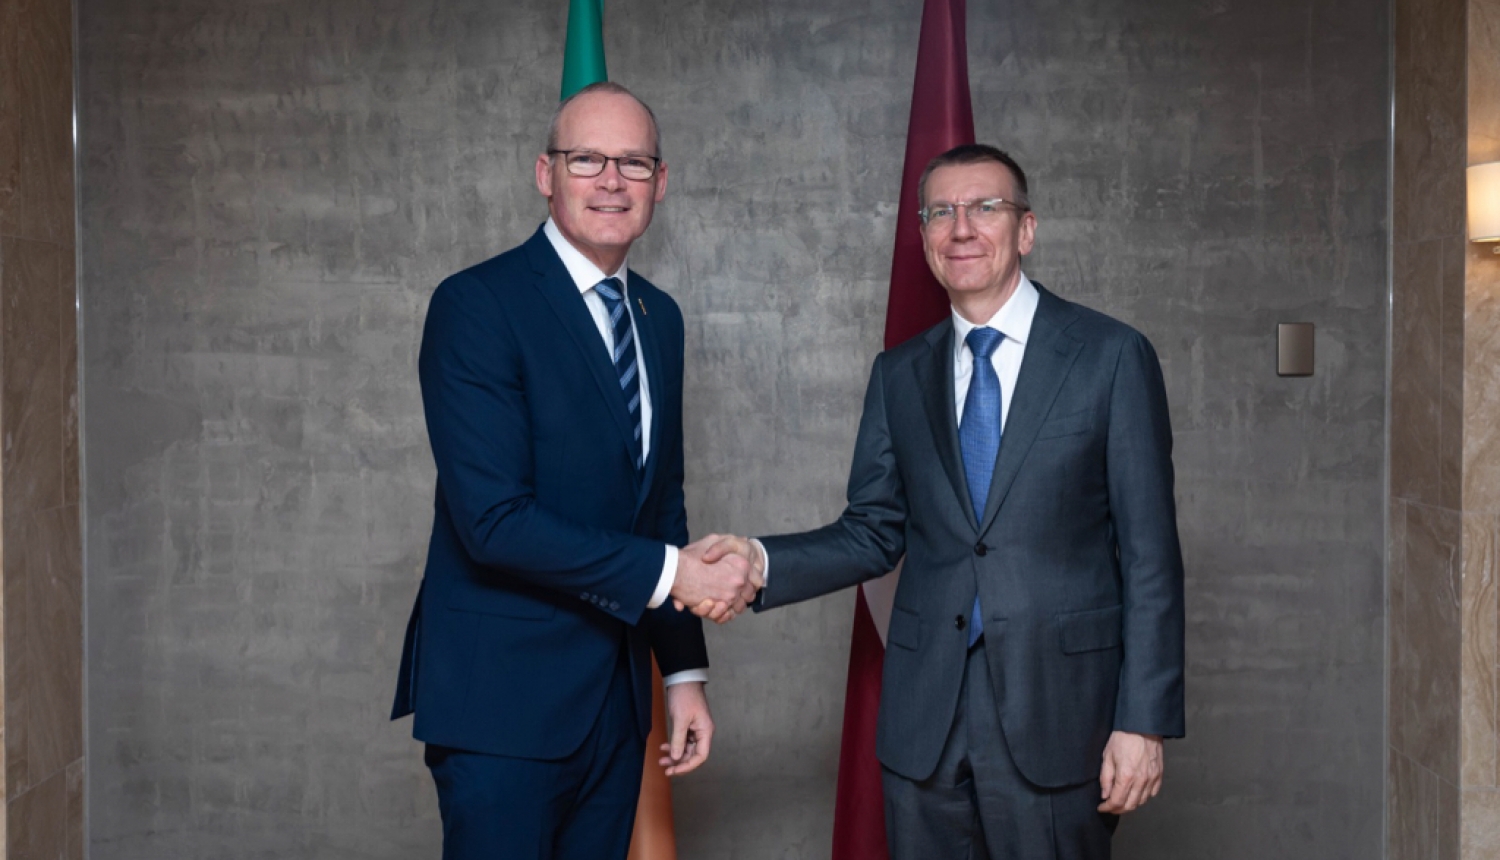 Ireland’s Minister for Foreign Affairs and Minister for Defence visits Riga